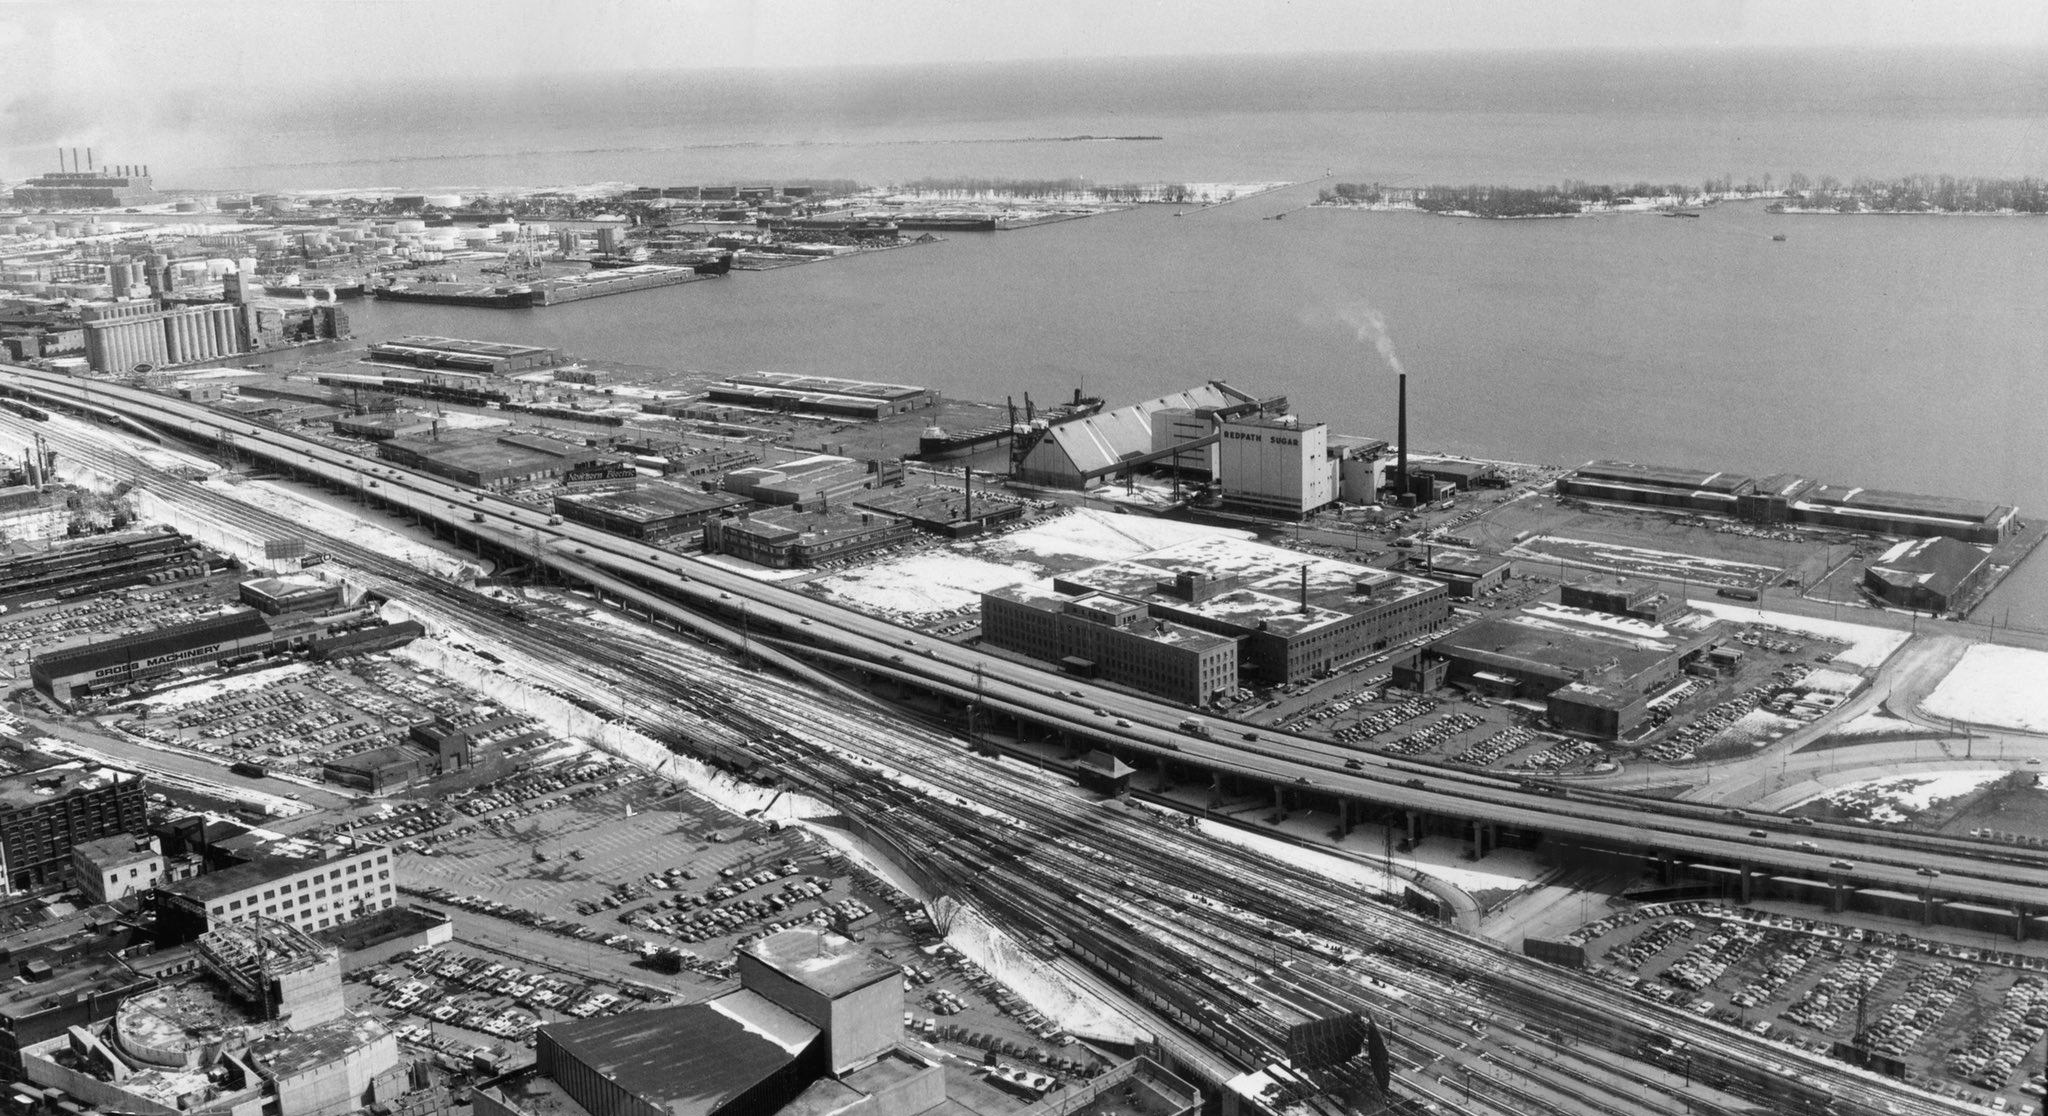 A view southeast, picking up marine terminals, the Redpath Sugar plant, and the broader commercial port, 1960s